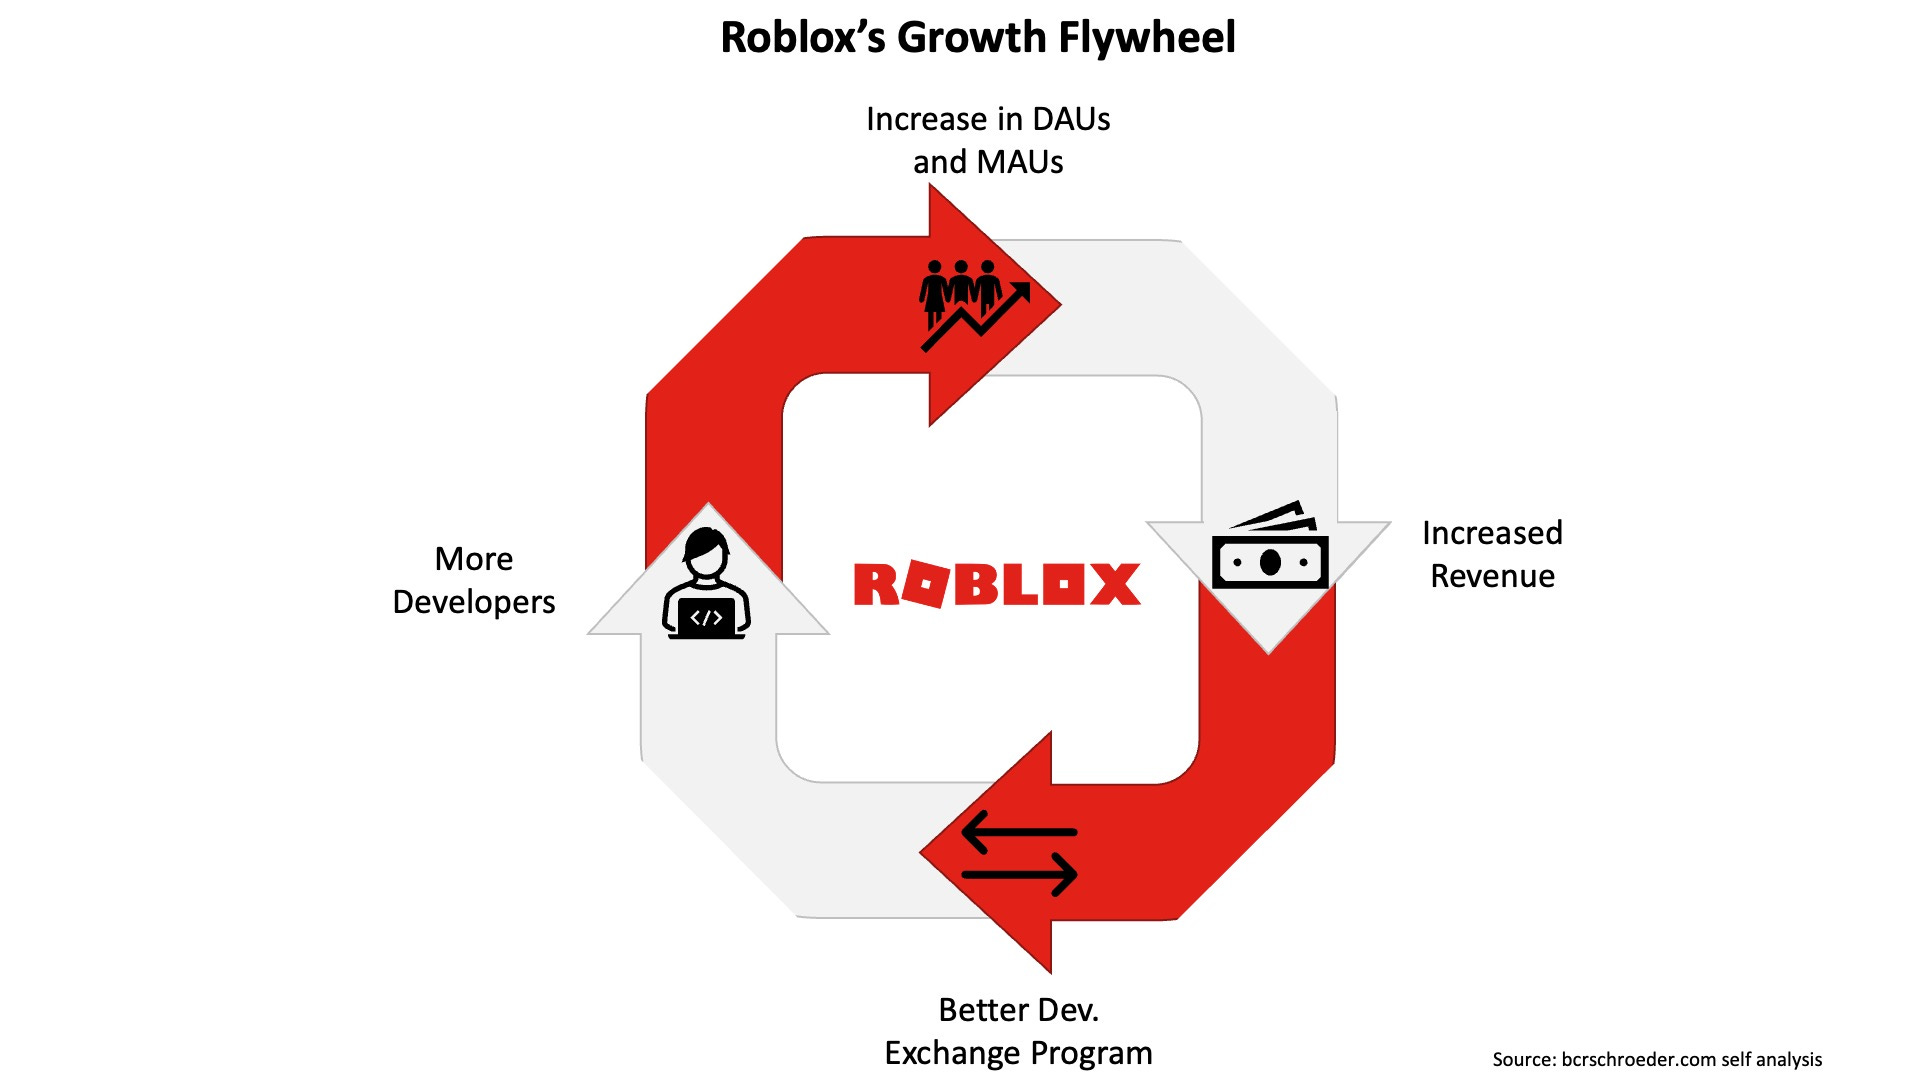 Roblox aims to be 'one of the biggest virtual economies on Earth' through  additional creator monetization tools